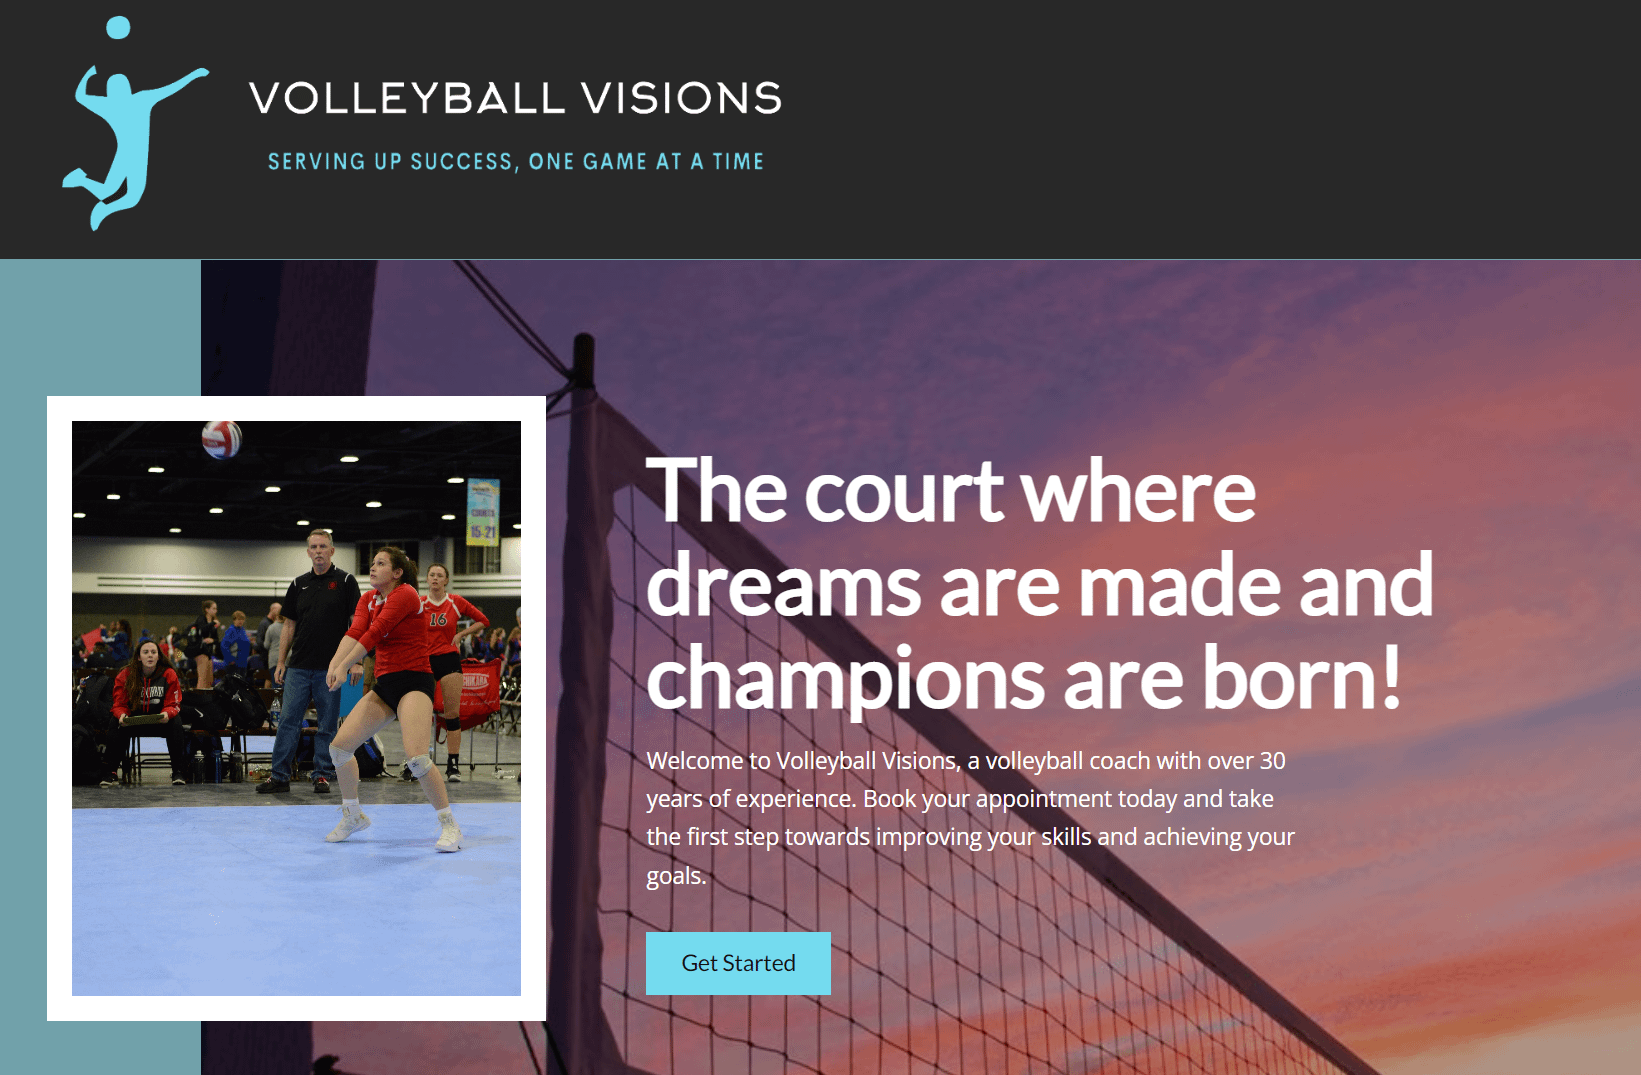 Volleyball Visions